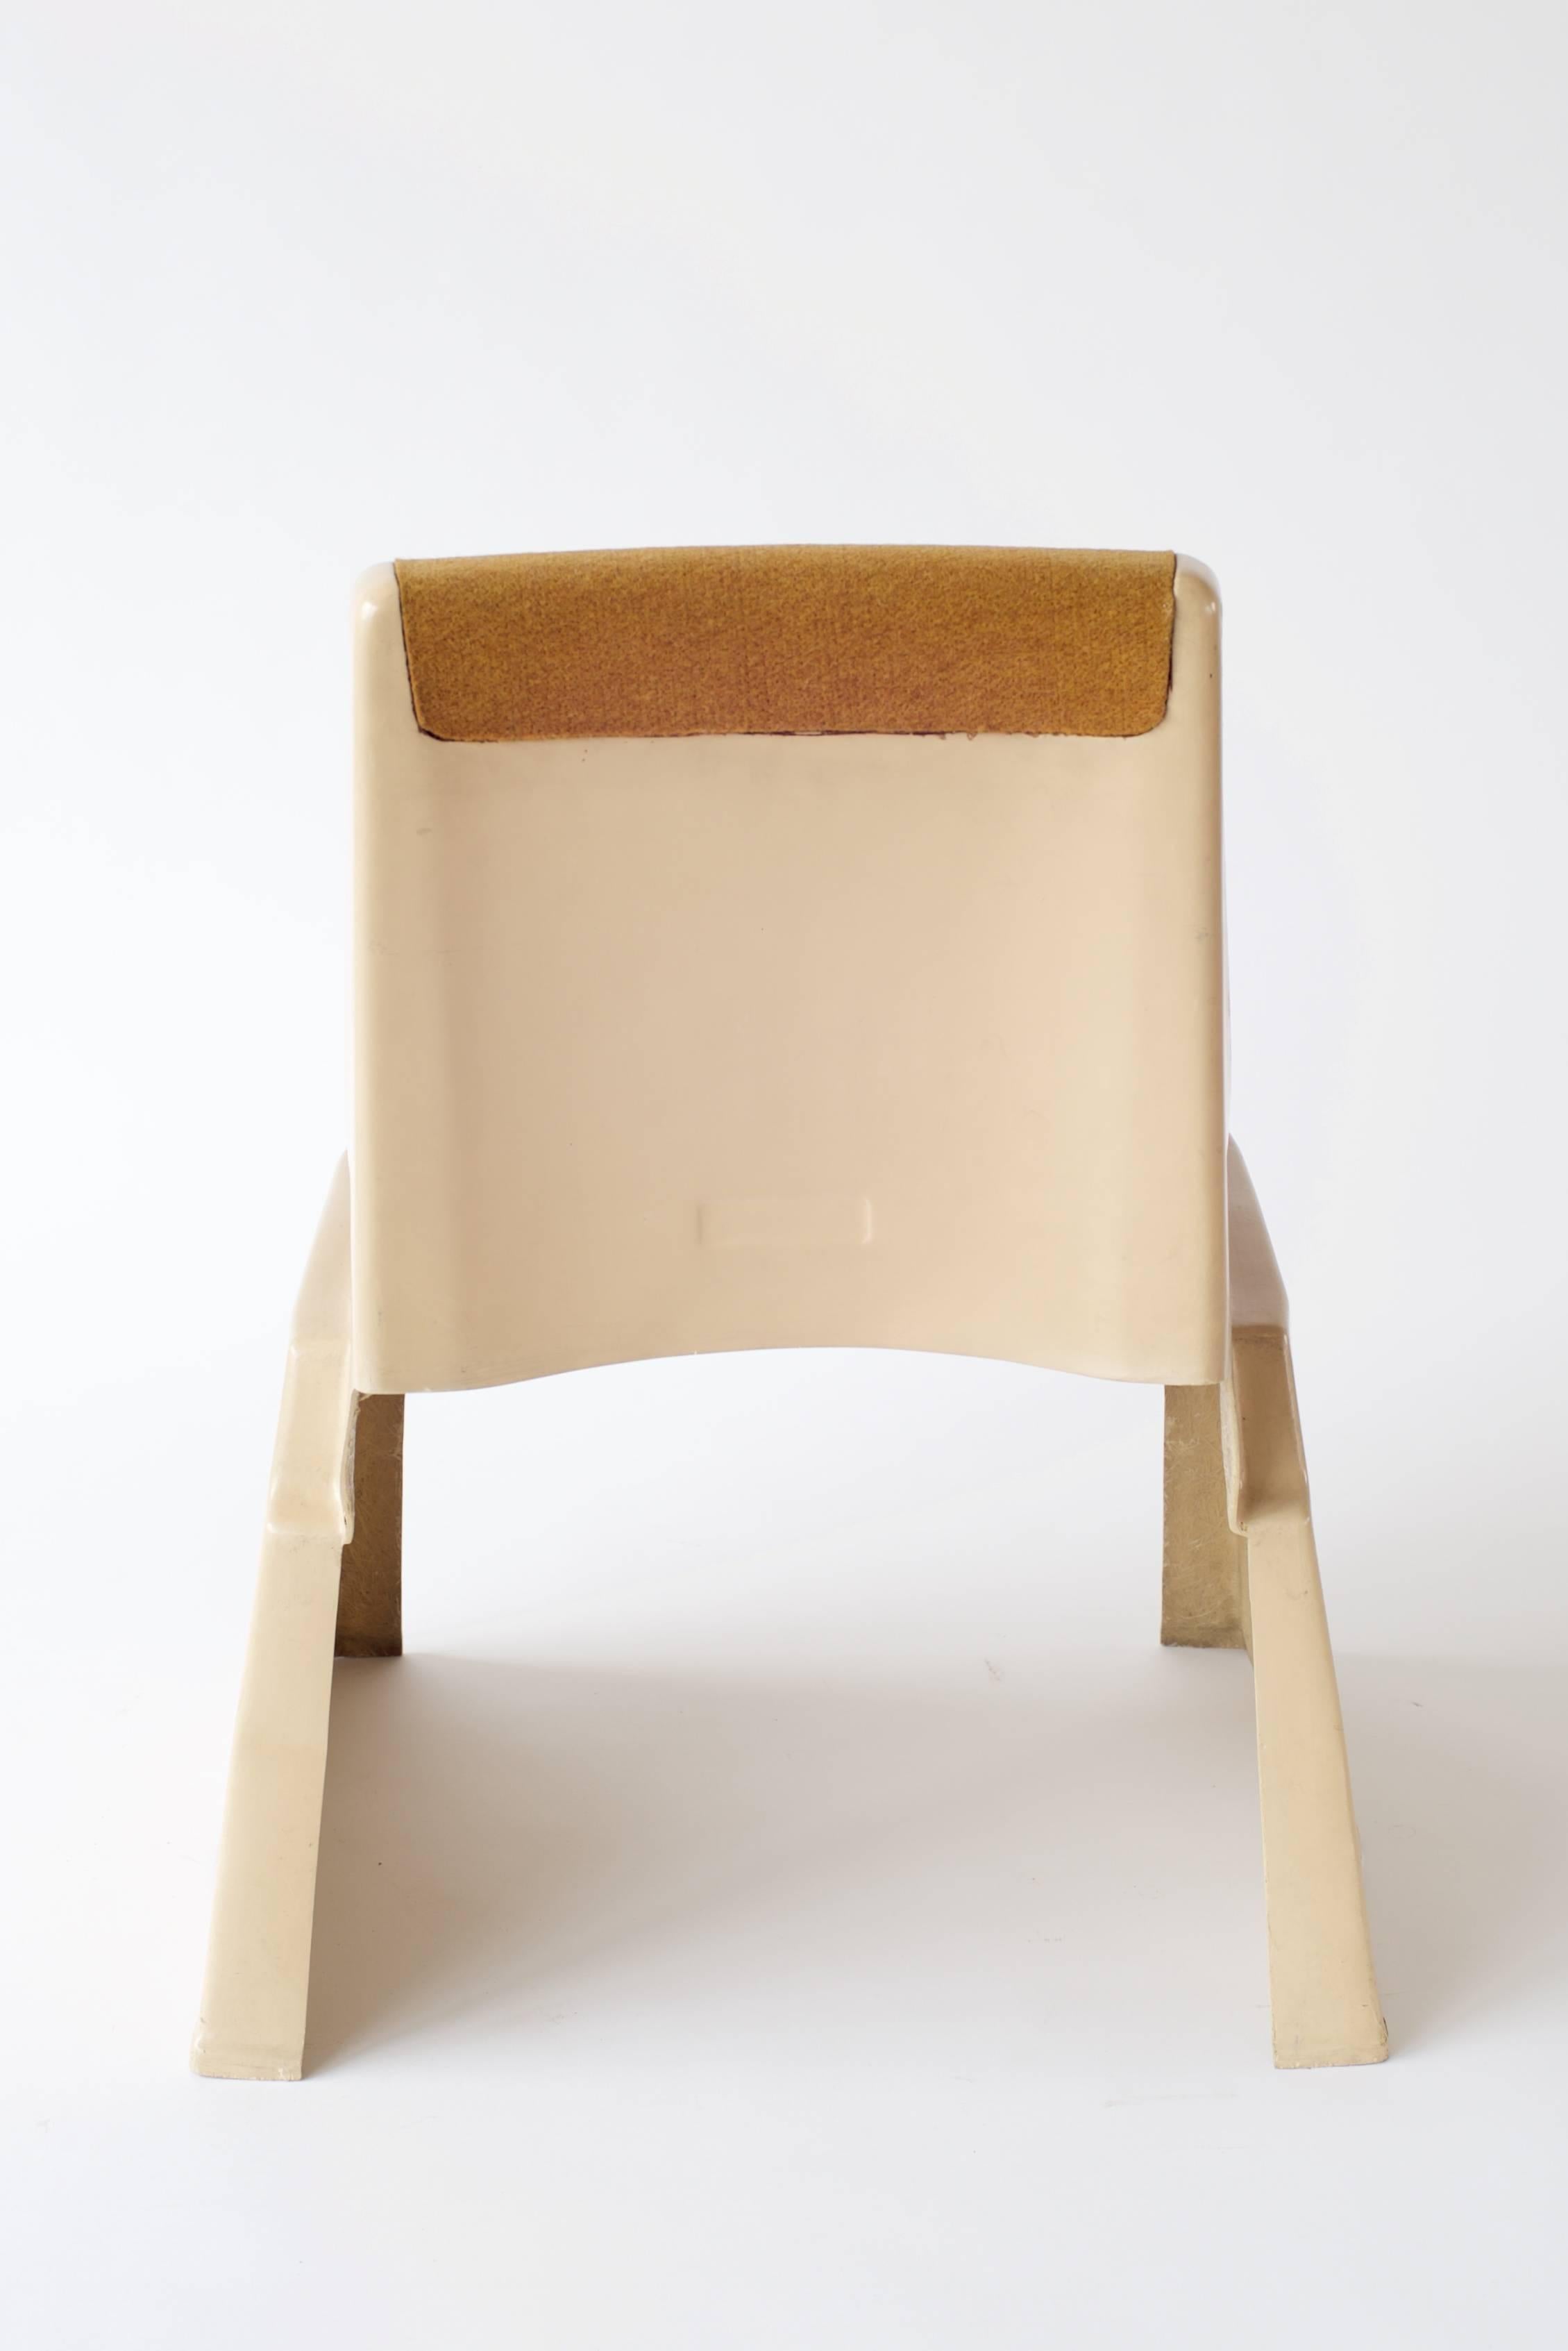 Rare Stacking Chairs by Prof. Günther Domenig In Good Condition For Sale In Vienna, AT